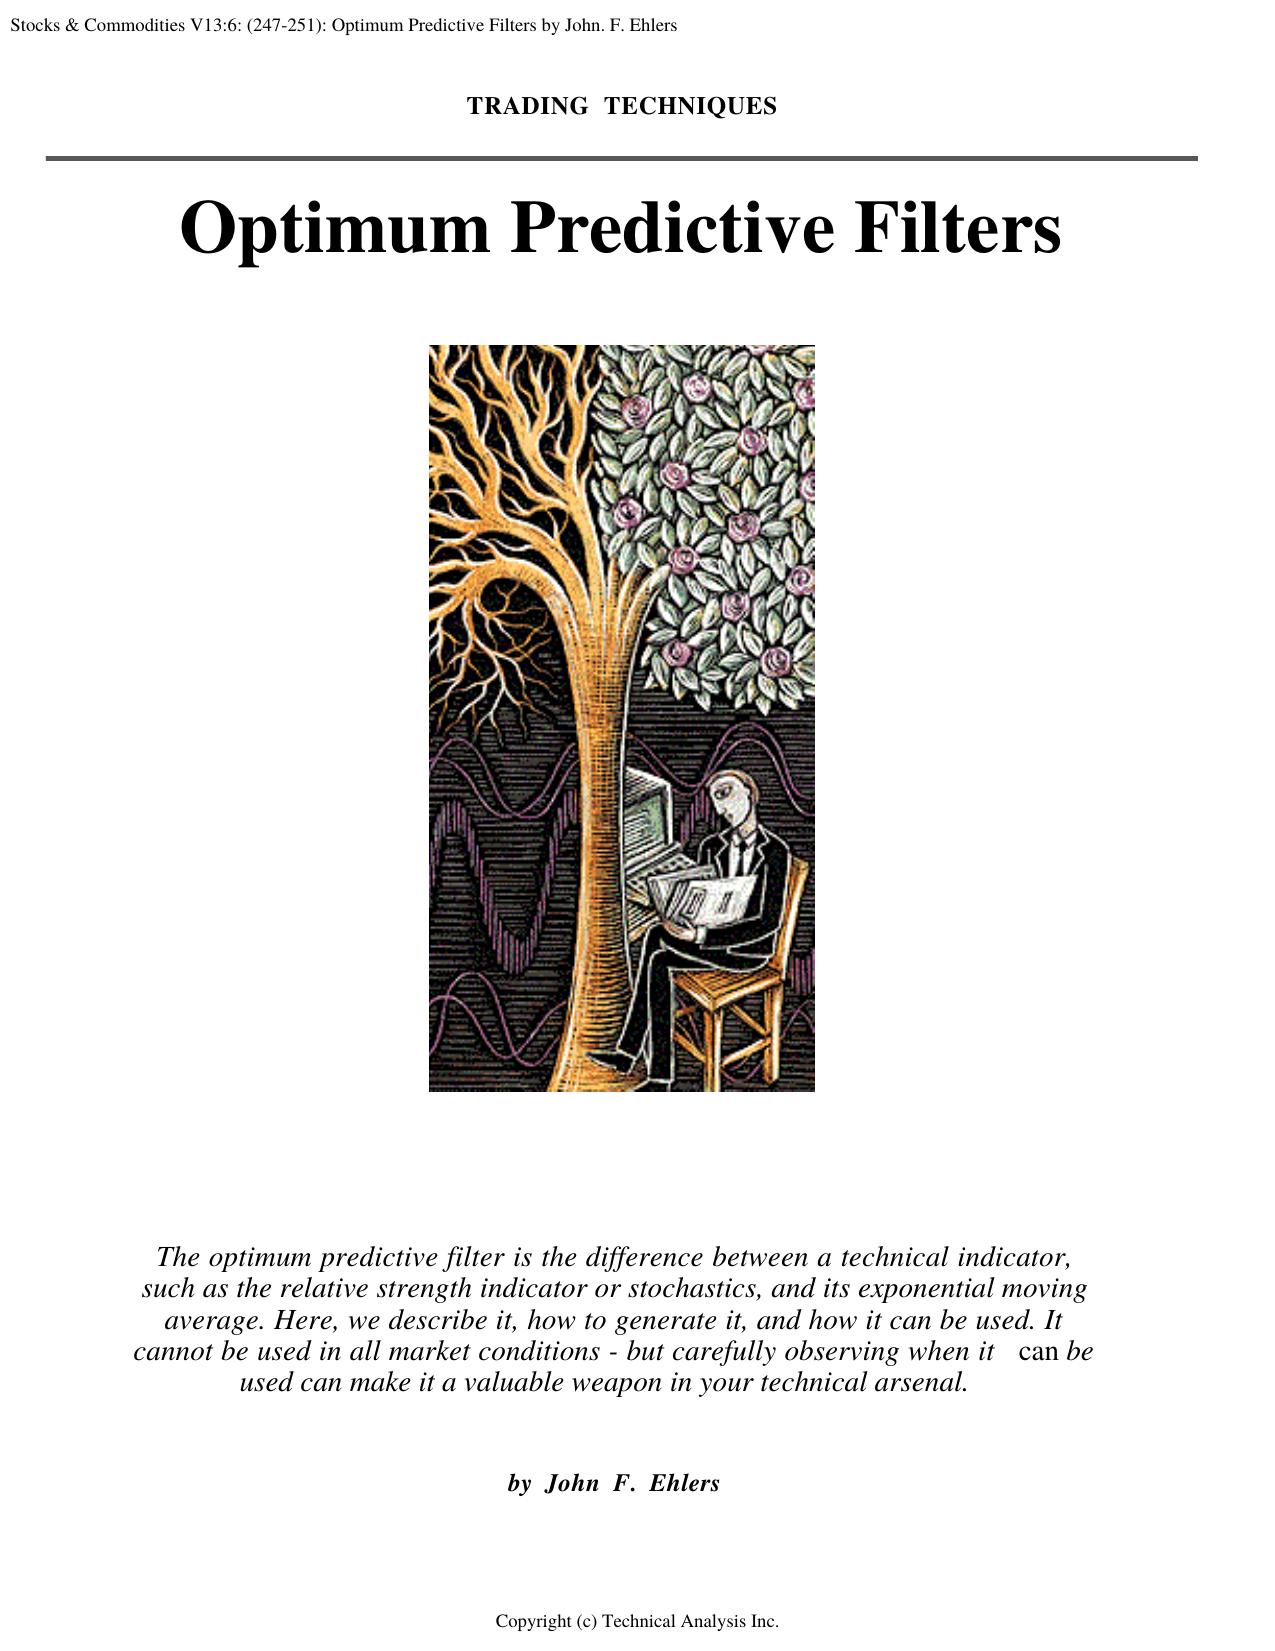 Stocks & Commodities V13:15: (247-251):Optimum Predictive Filters by John F. Ehlers by John F. Ehlers